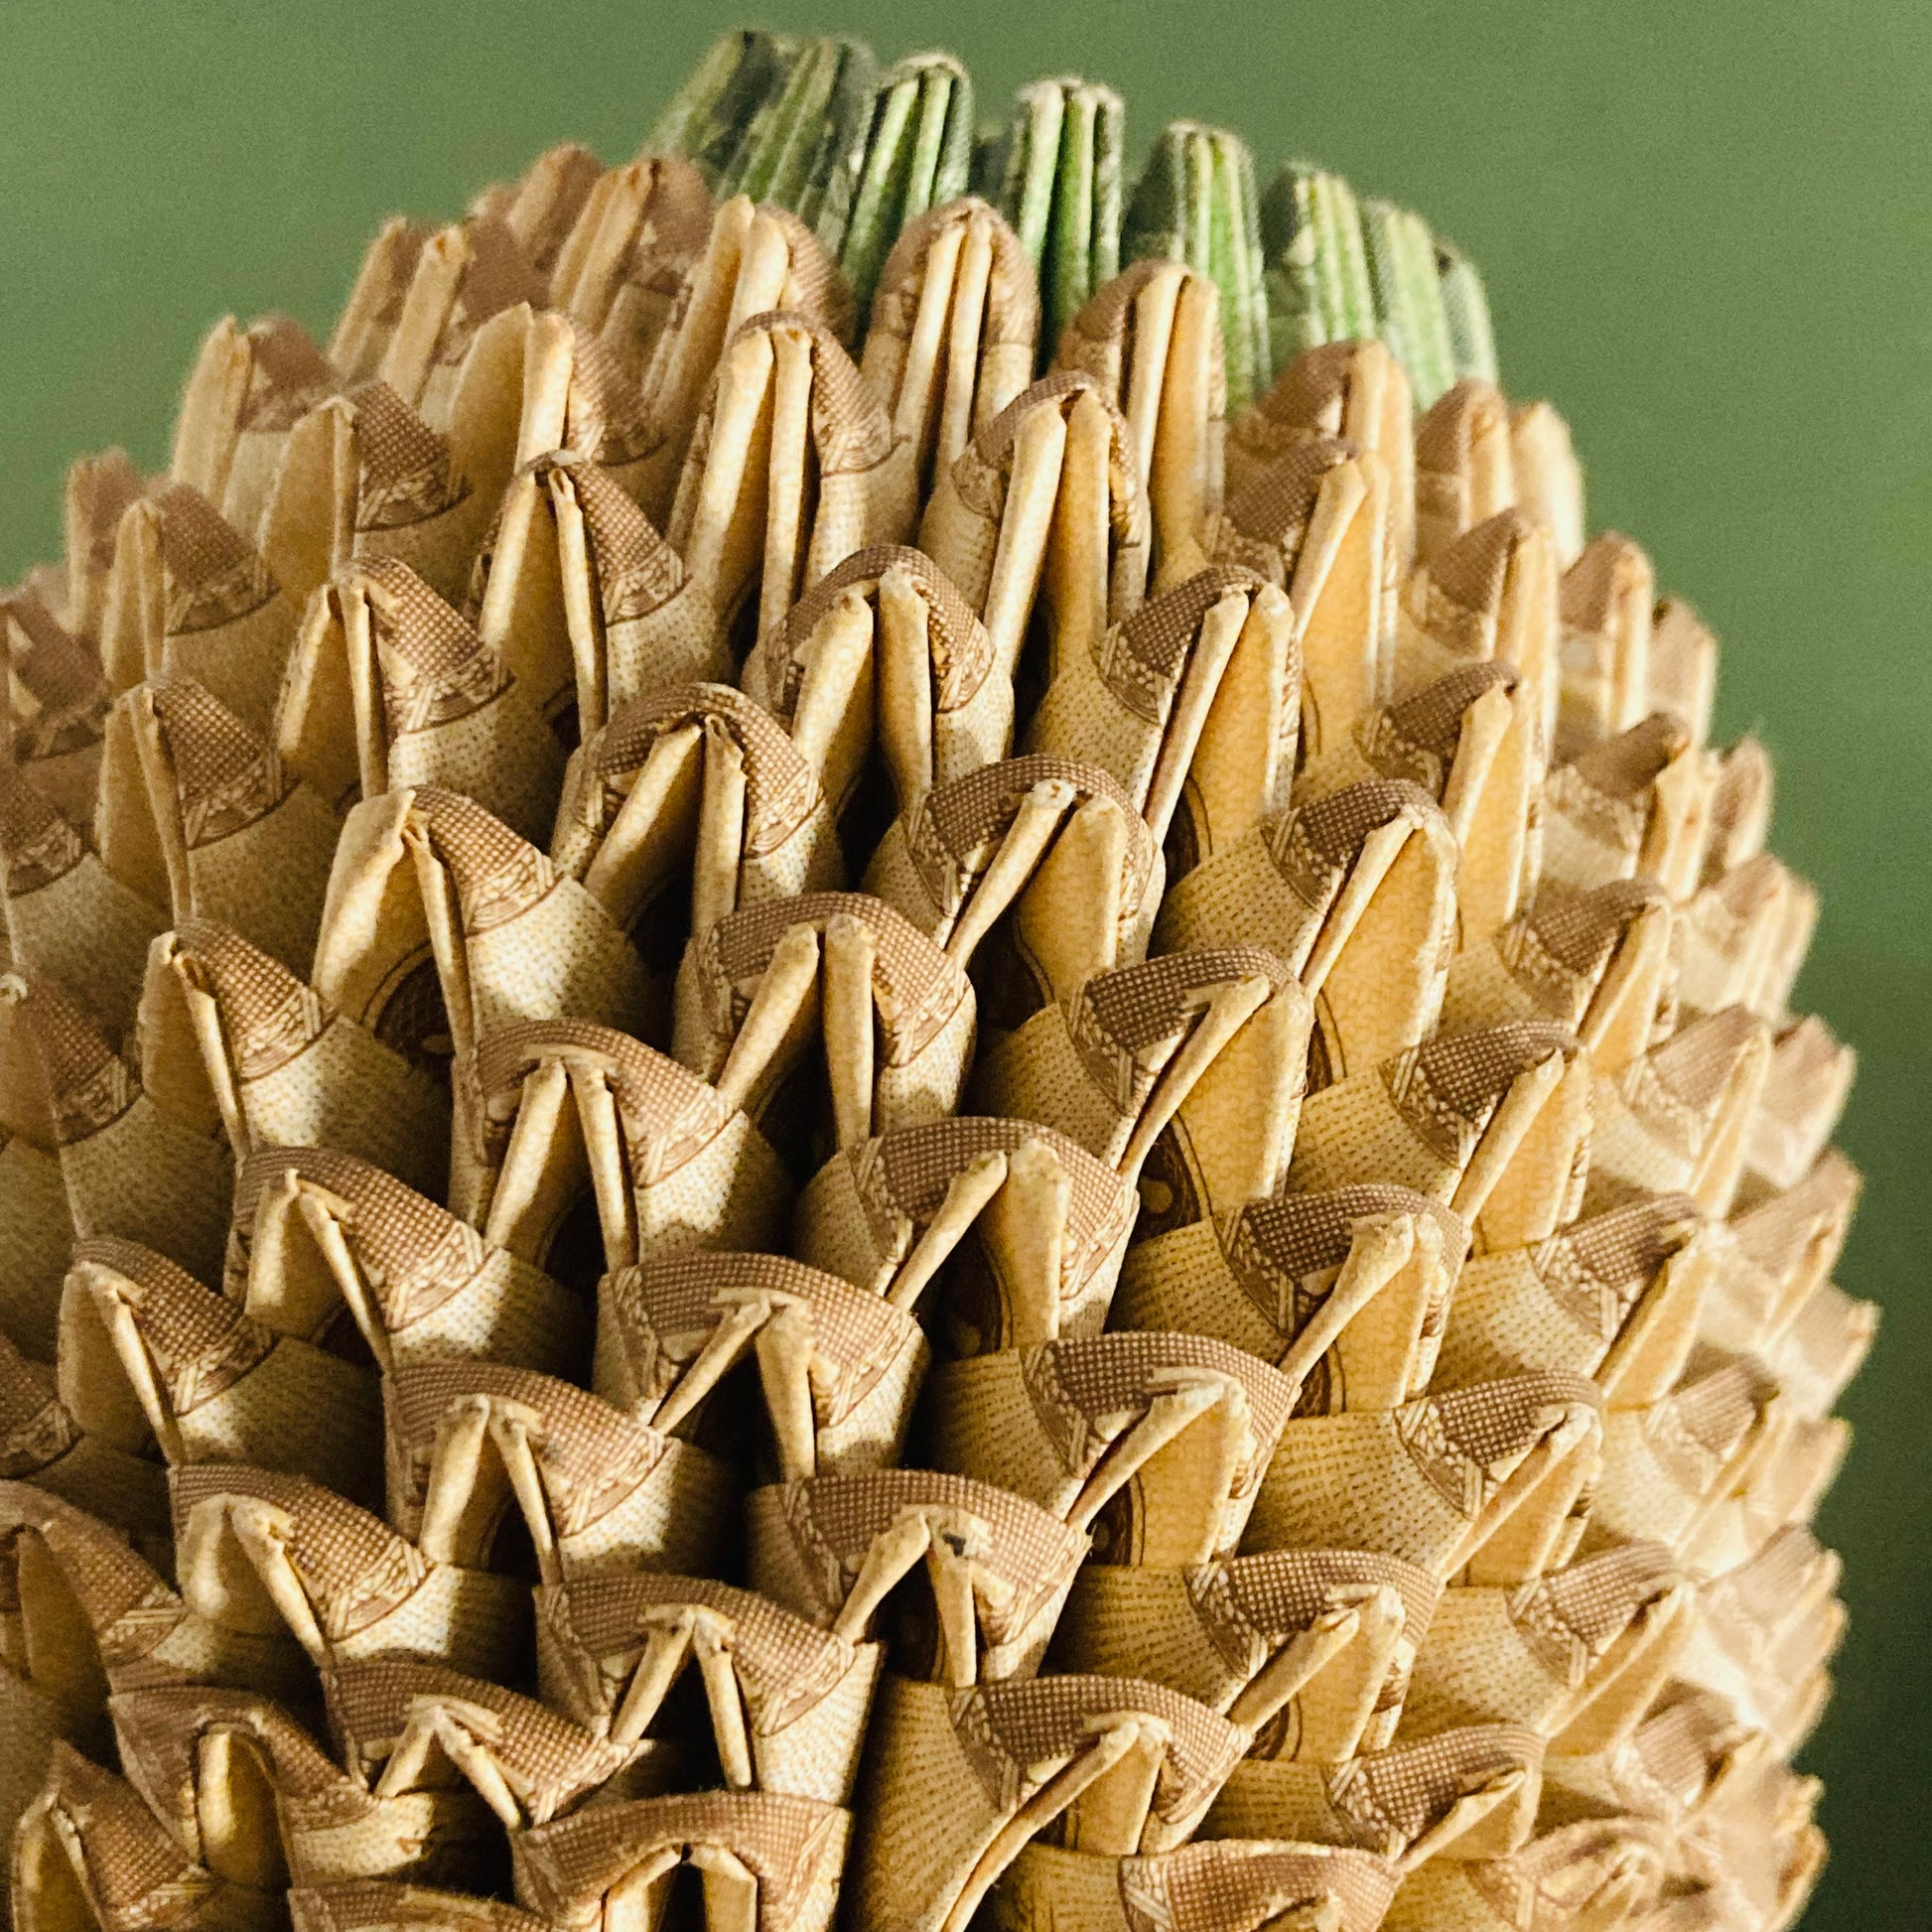 Vintage Origami Pineapple Sculpture of Chinese Banknotes | Unusual Gift Idea